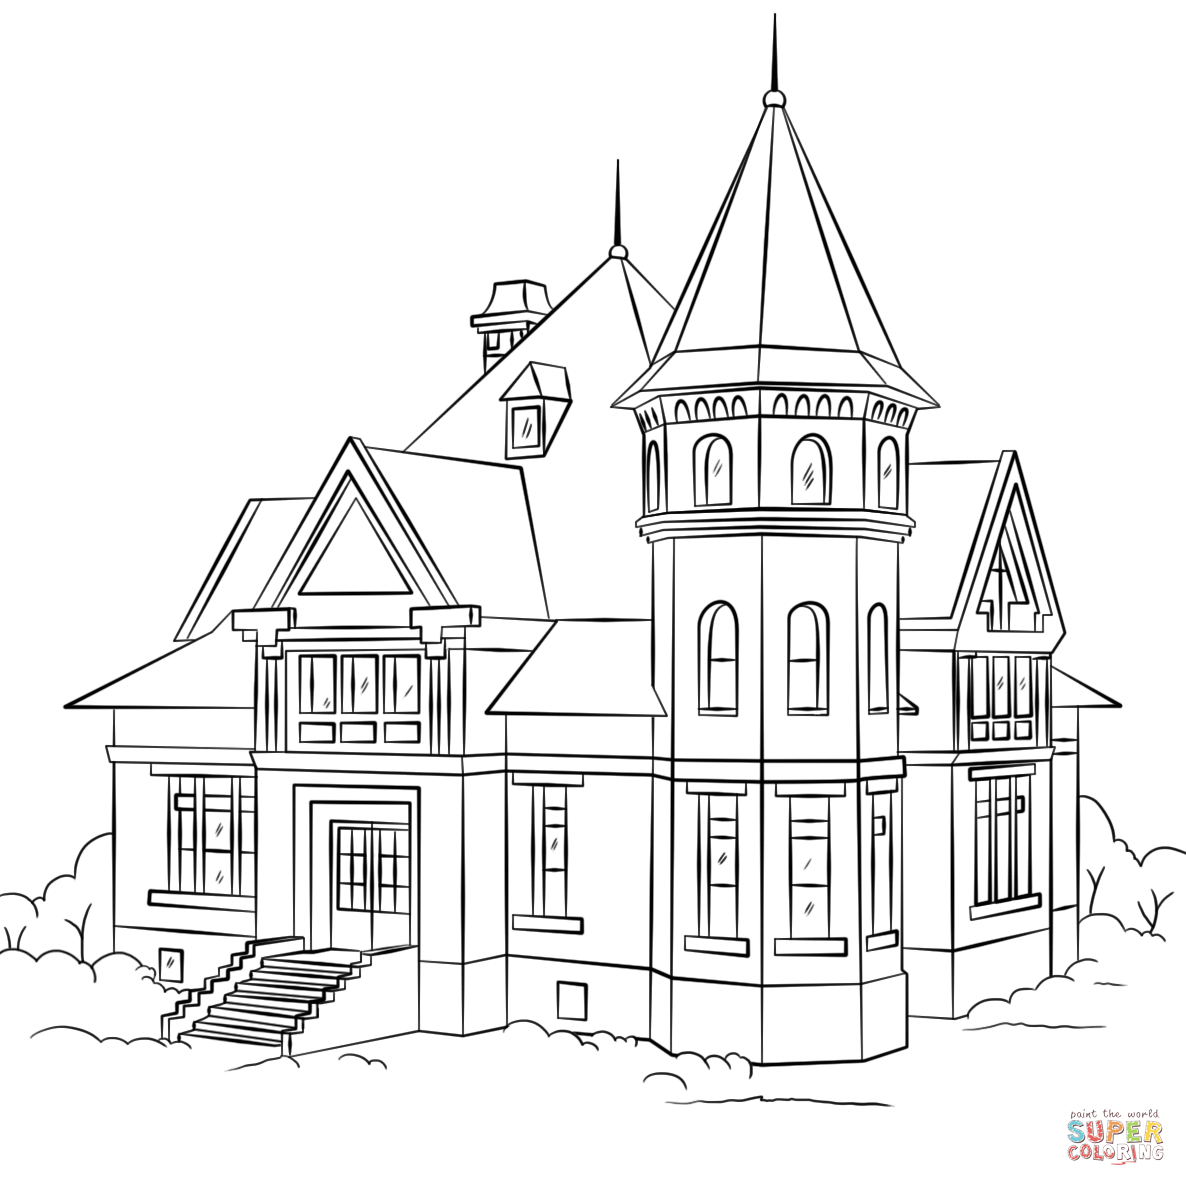 Real Estate Coloring Pages at GetColorings.com | Free printable